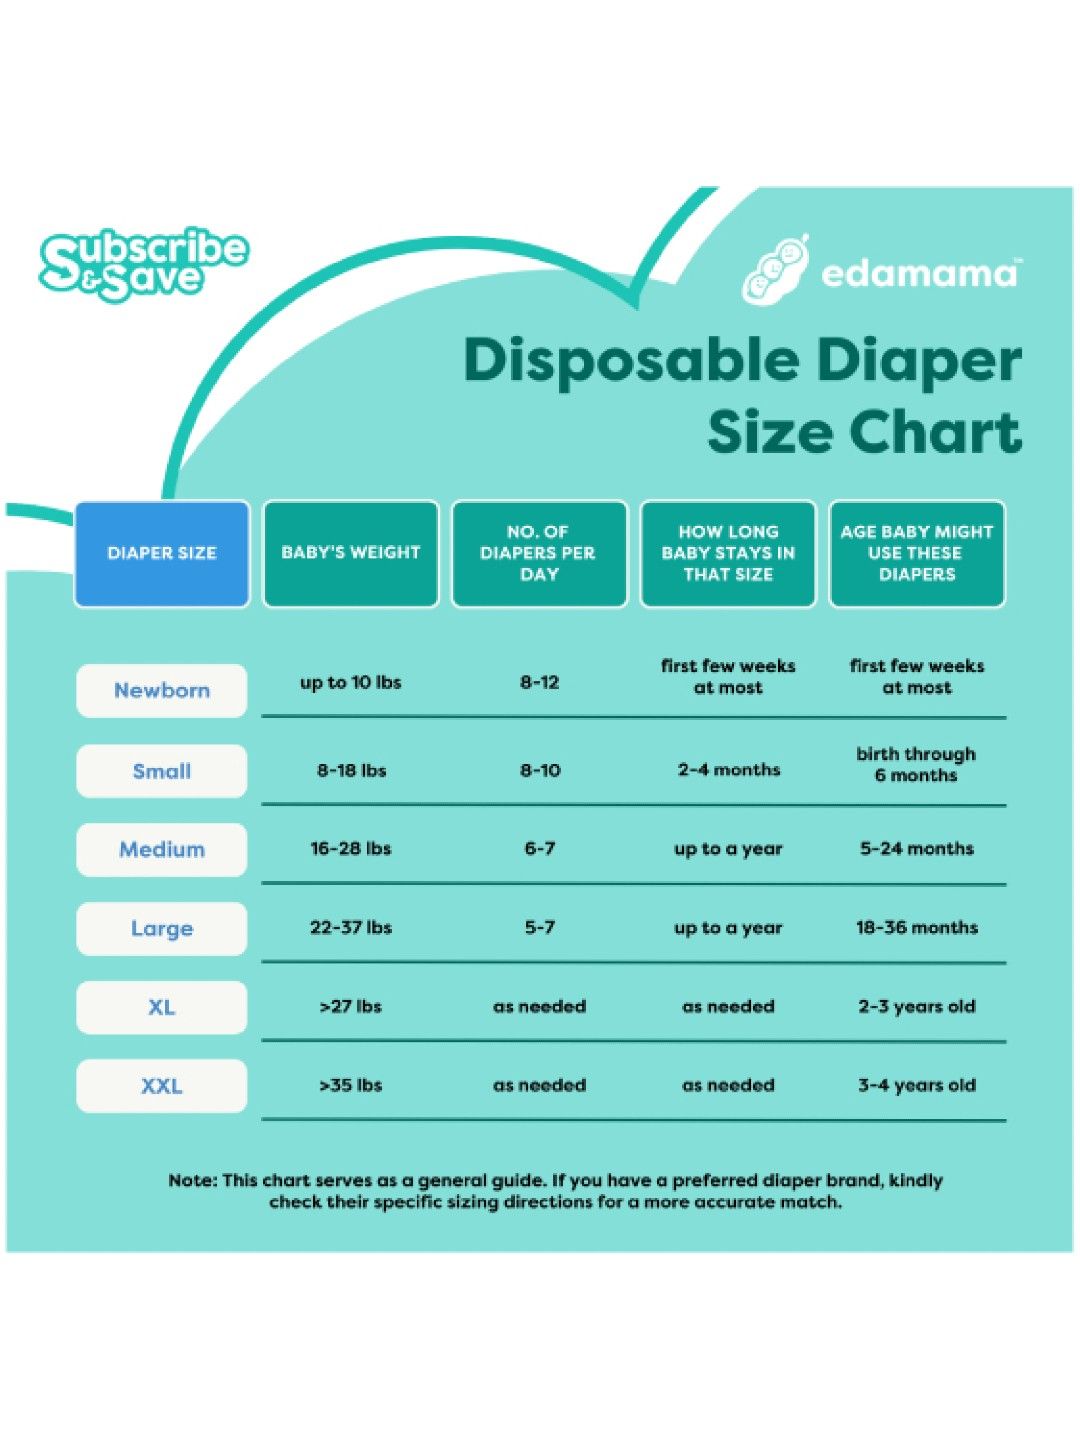 EQ Diapers and Wipes Dry Econo Pack Tape Diaper New Born (44 pcs x 3 pack) - Subscription (No Color- Image 4)